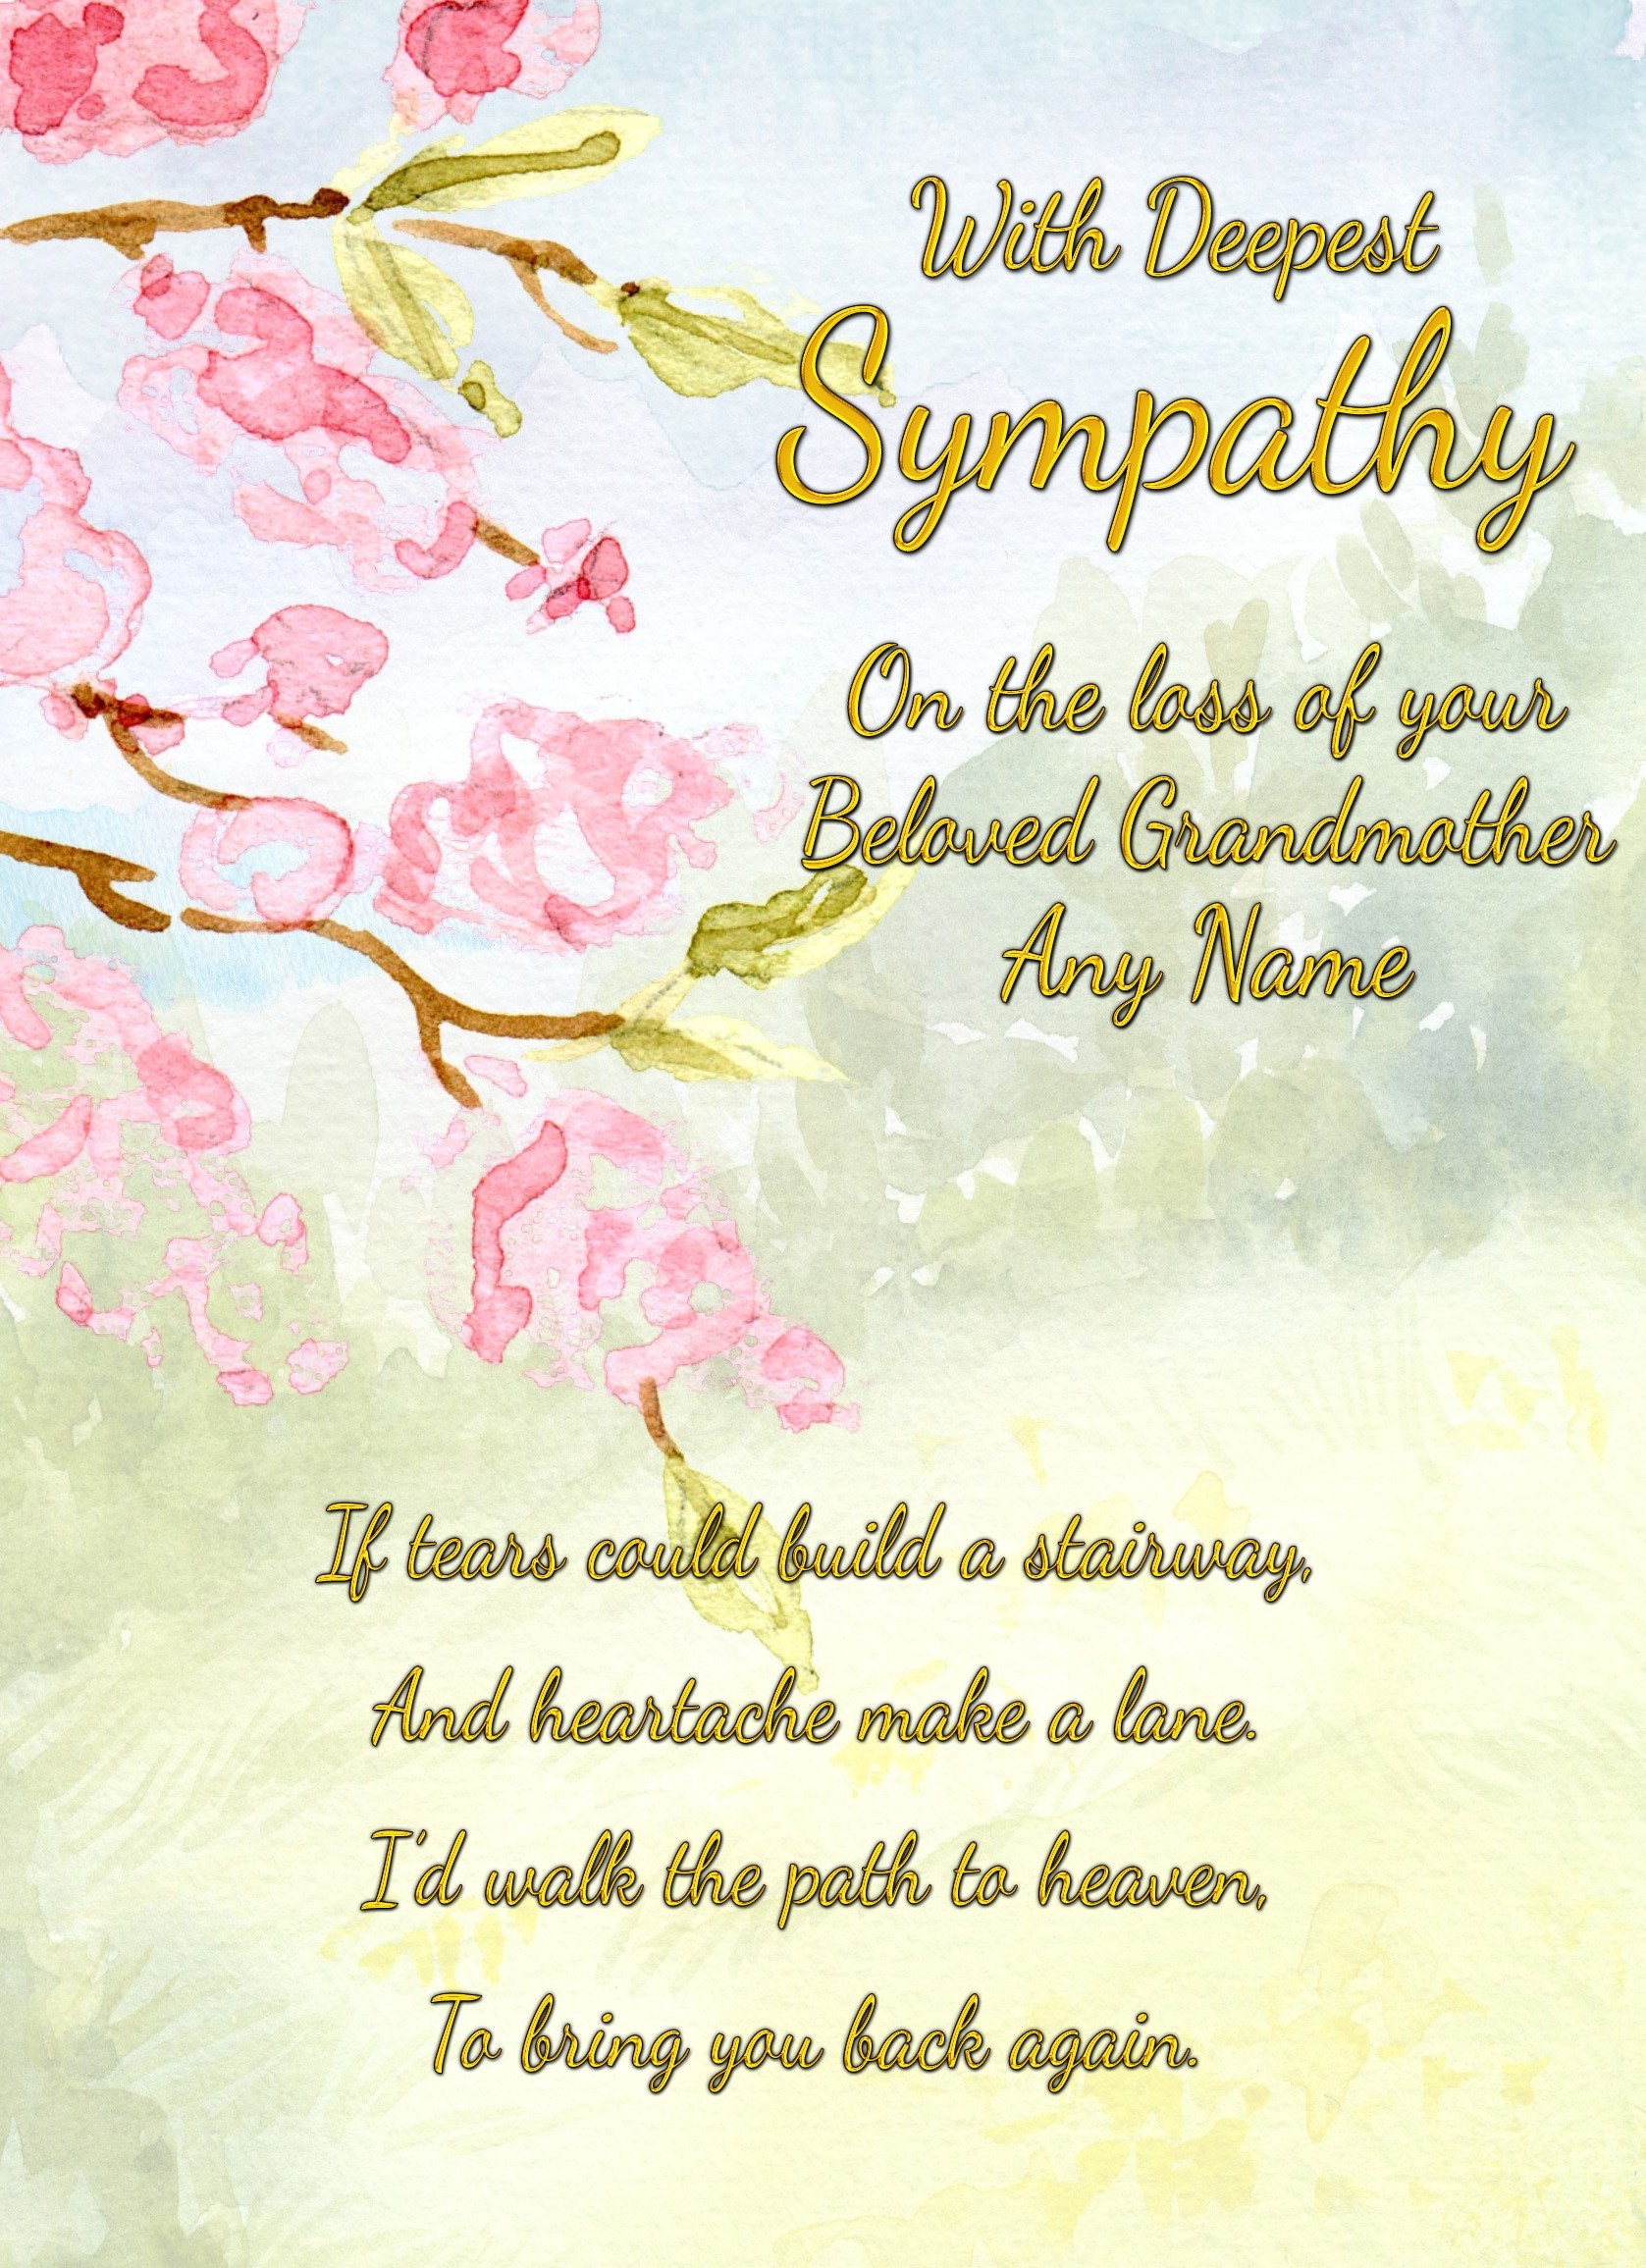 Personalised Sympathy Bereavement Card (With Deepest Sympathy, Beloved Grandmother)